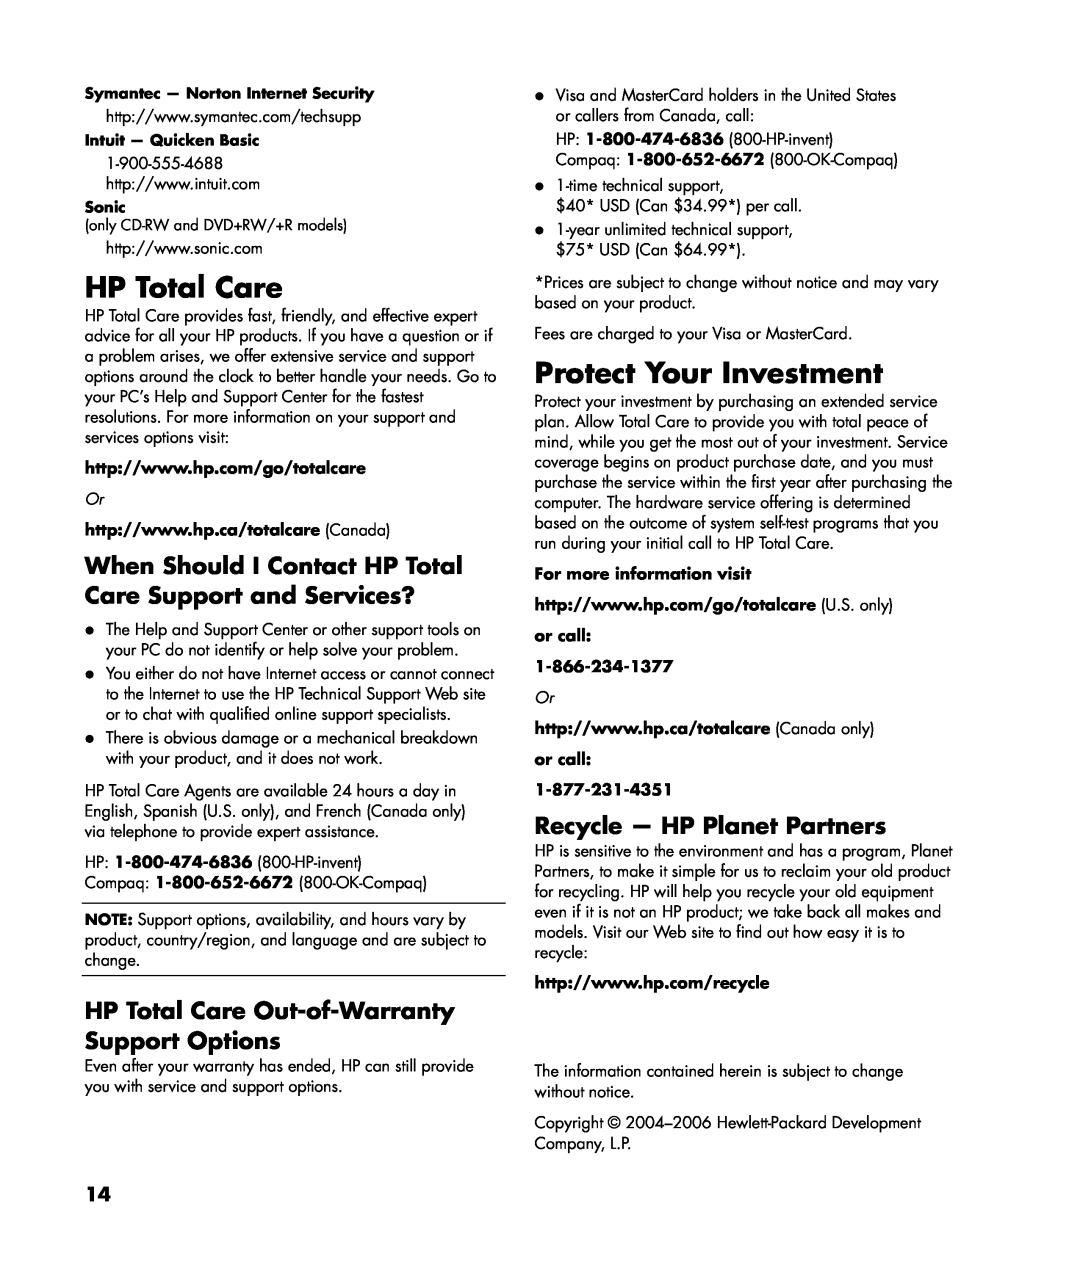 HP SR2032X, a1644x, SR2002X, SR2010NX Protect Your Investment, When Should I Contact HP Total Care Support and Services? 